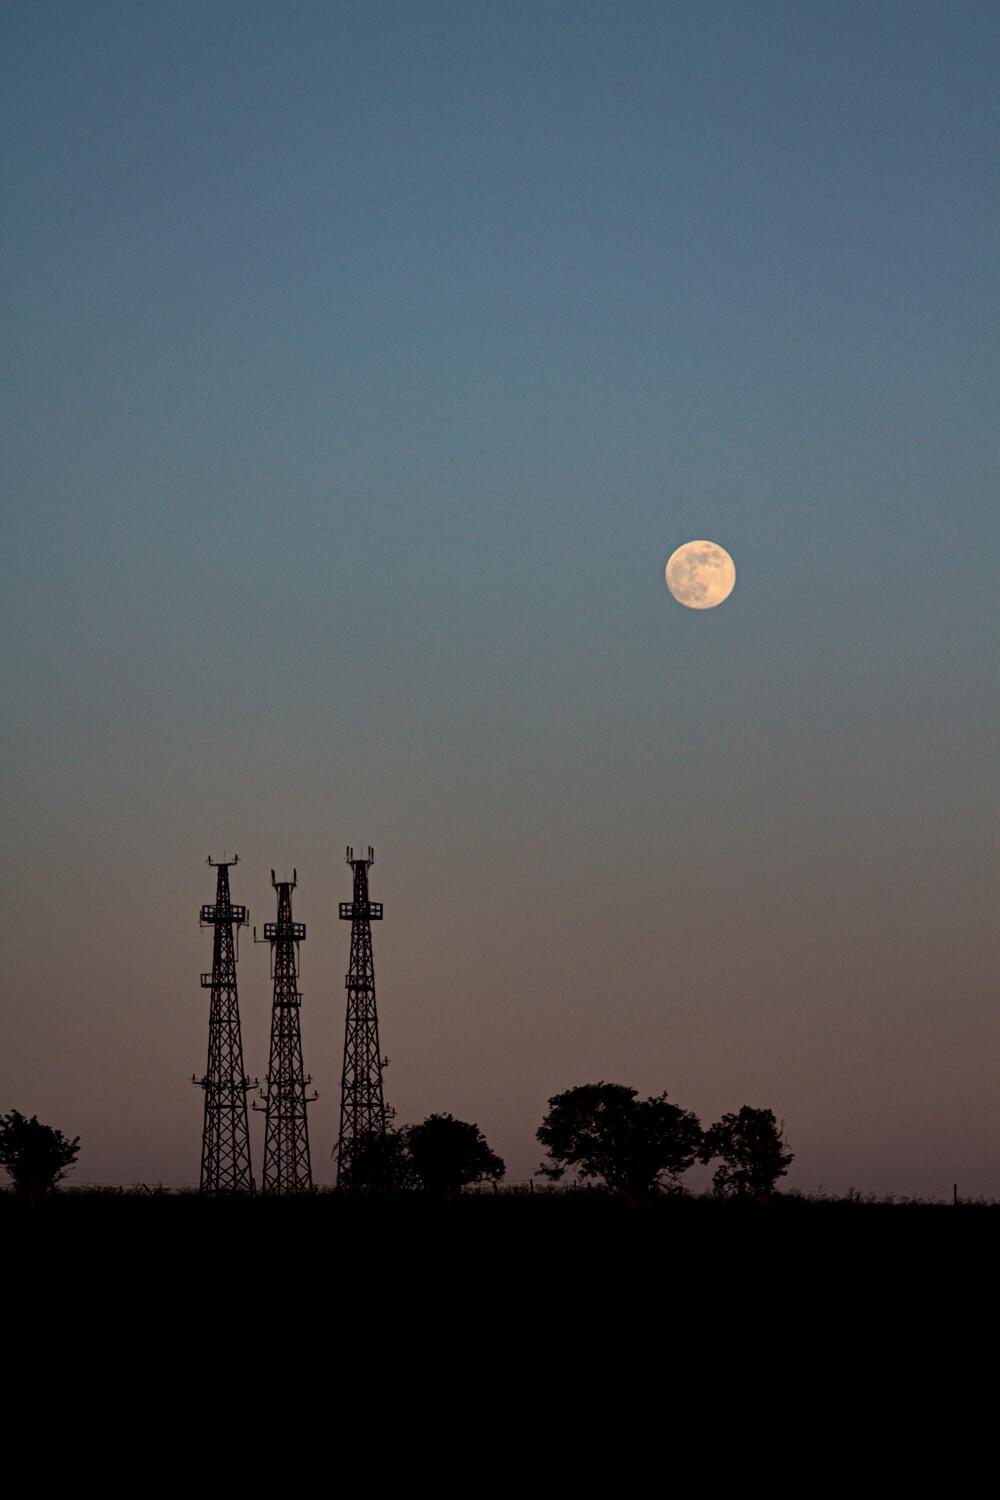 Landscape shot at dusk where the sky is an orange to blue gradient with the moon visible. On the horizon are some small trees and electrical towers